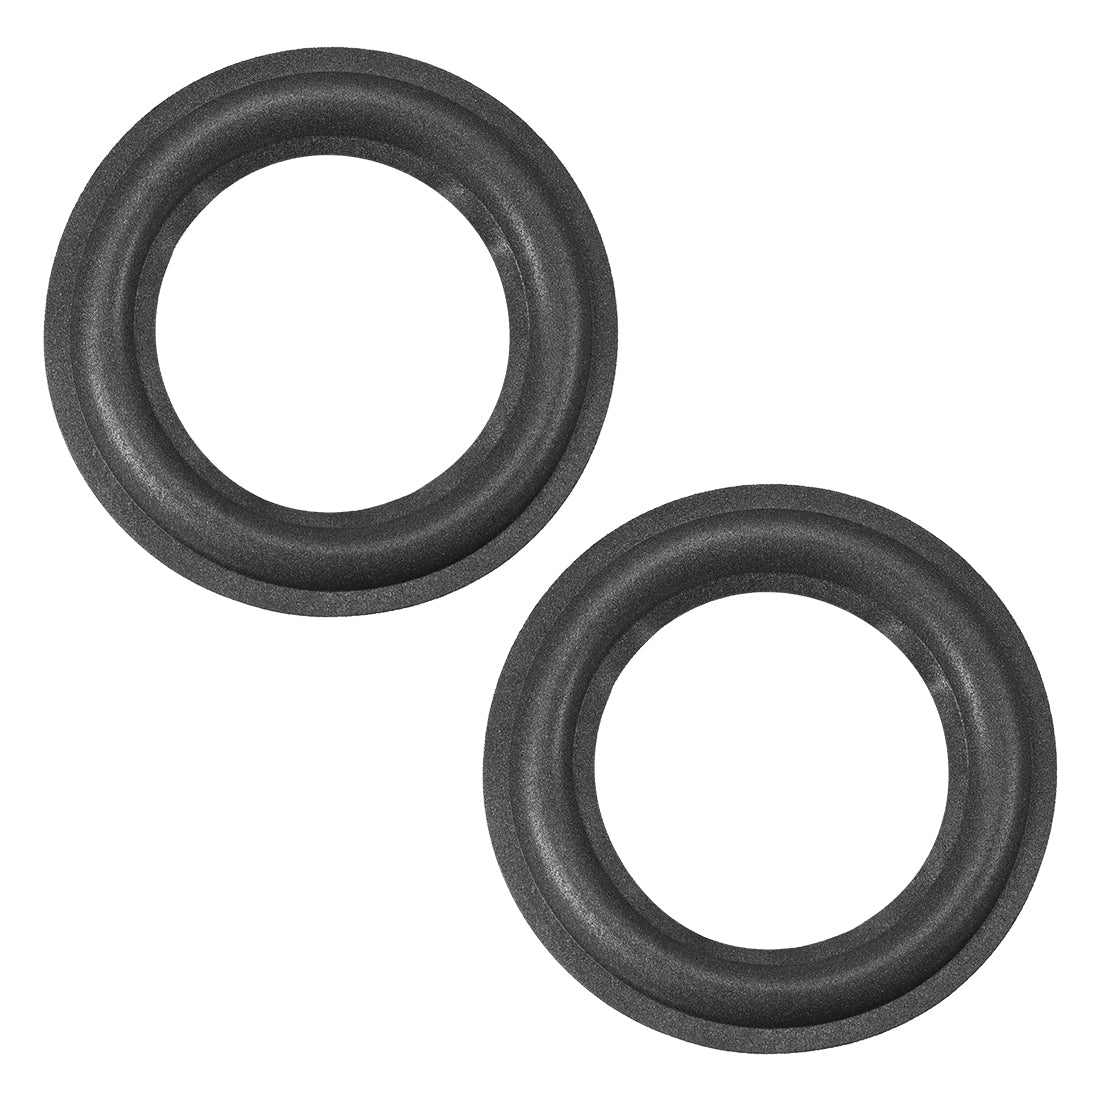 uxcell Uxcell 4.5" 4.5 Inch Foam Edge Surround Rings Replacement Parts for Repair or DIY 2pcs